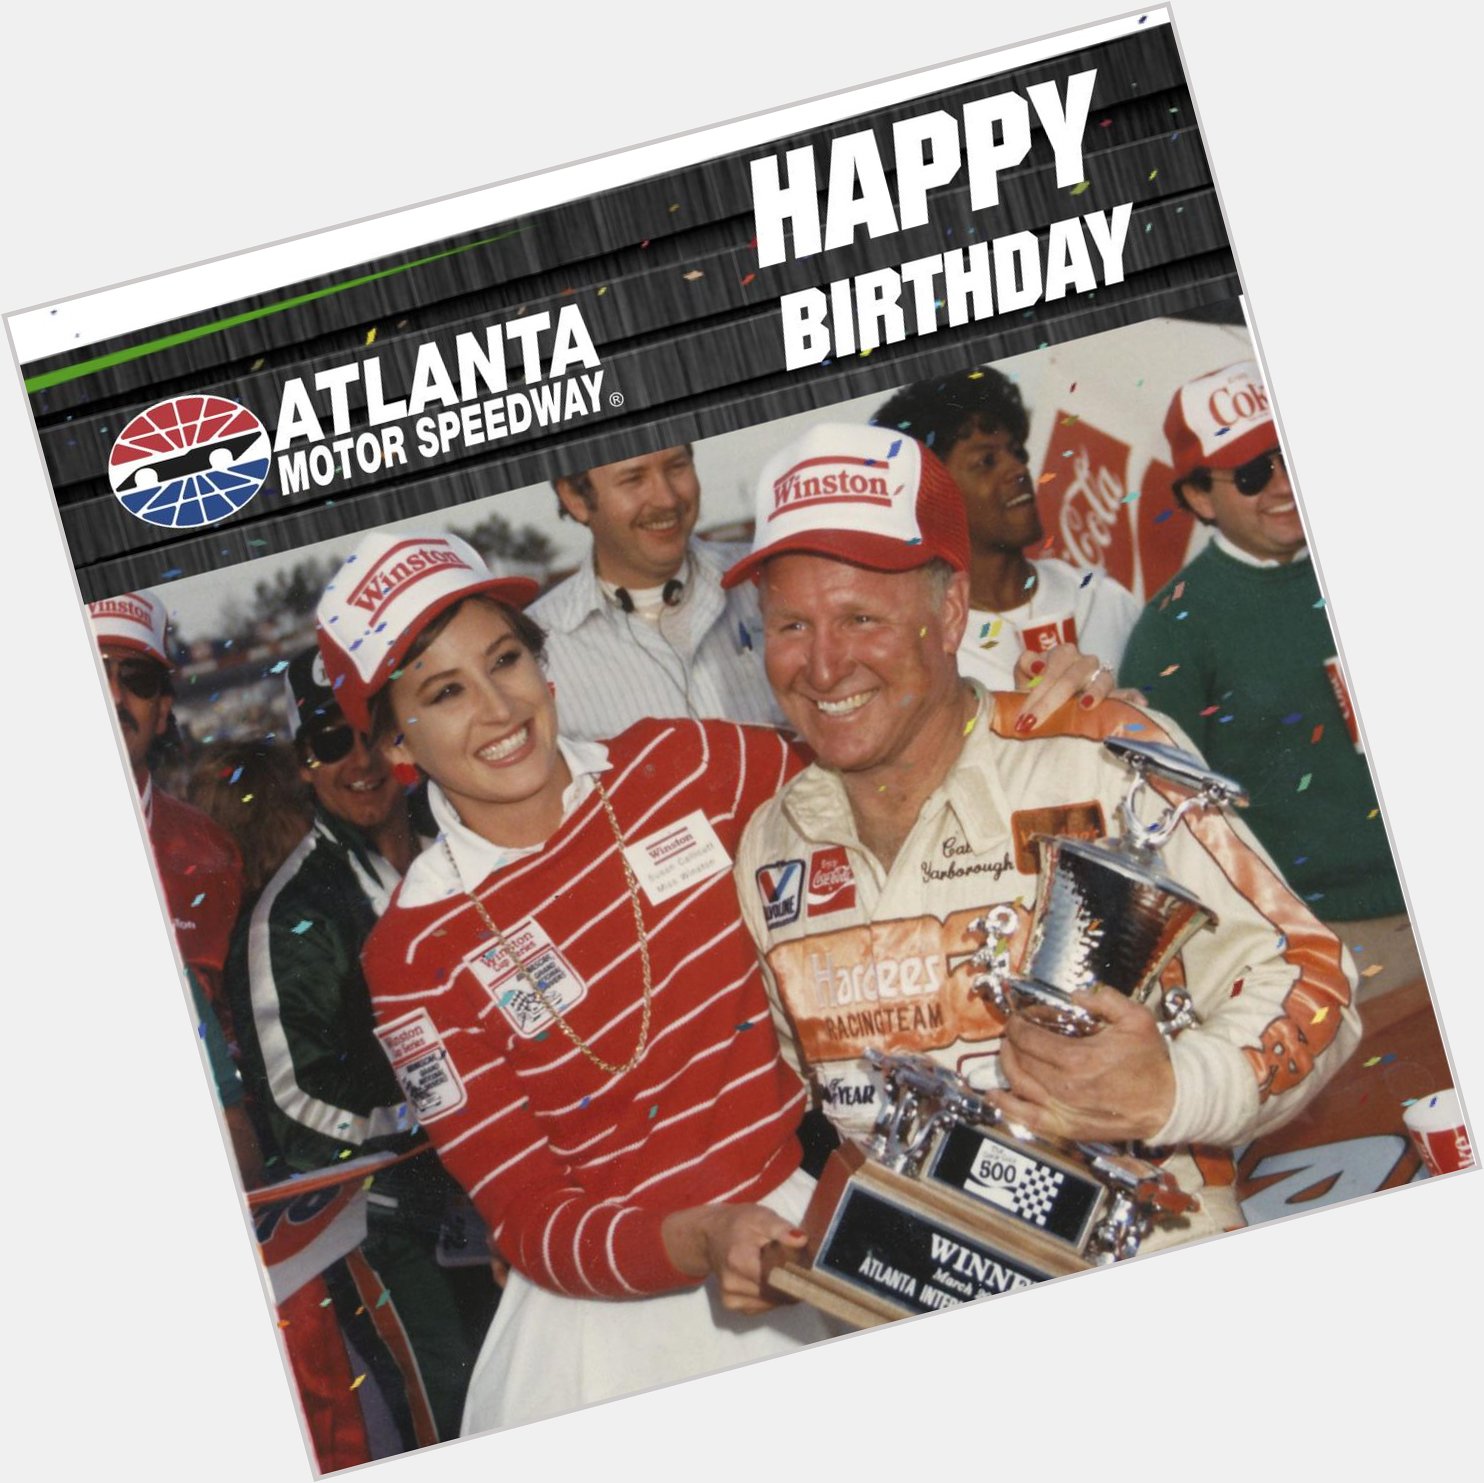 Here\s to a legend celebrating his birthday today! Happy birthday wishes to Cale Yarborough! 